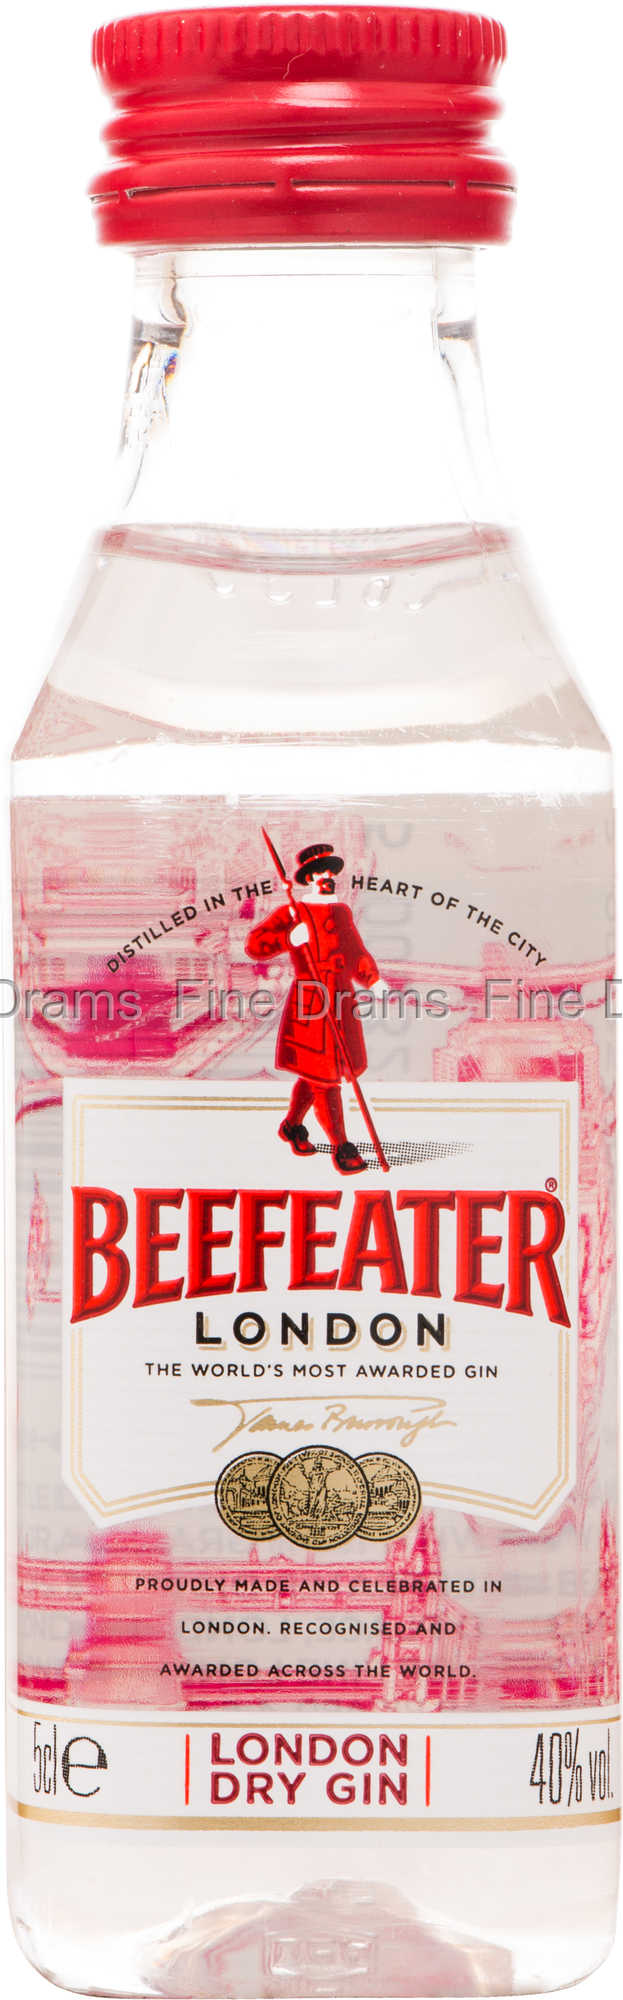 Beefeater Gin Offers